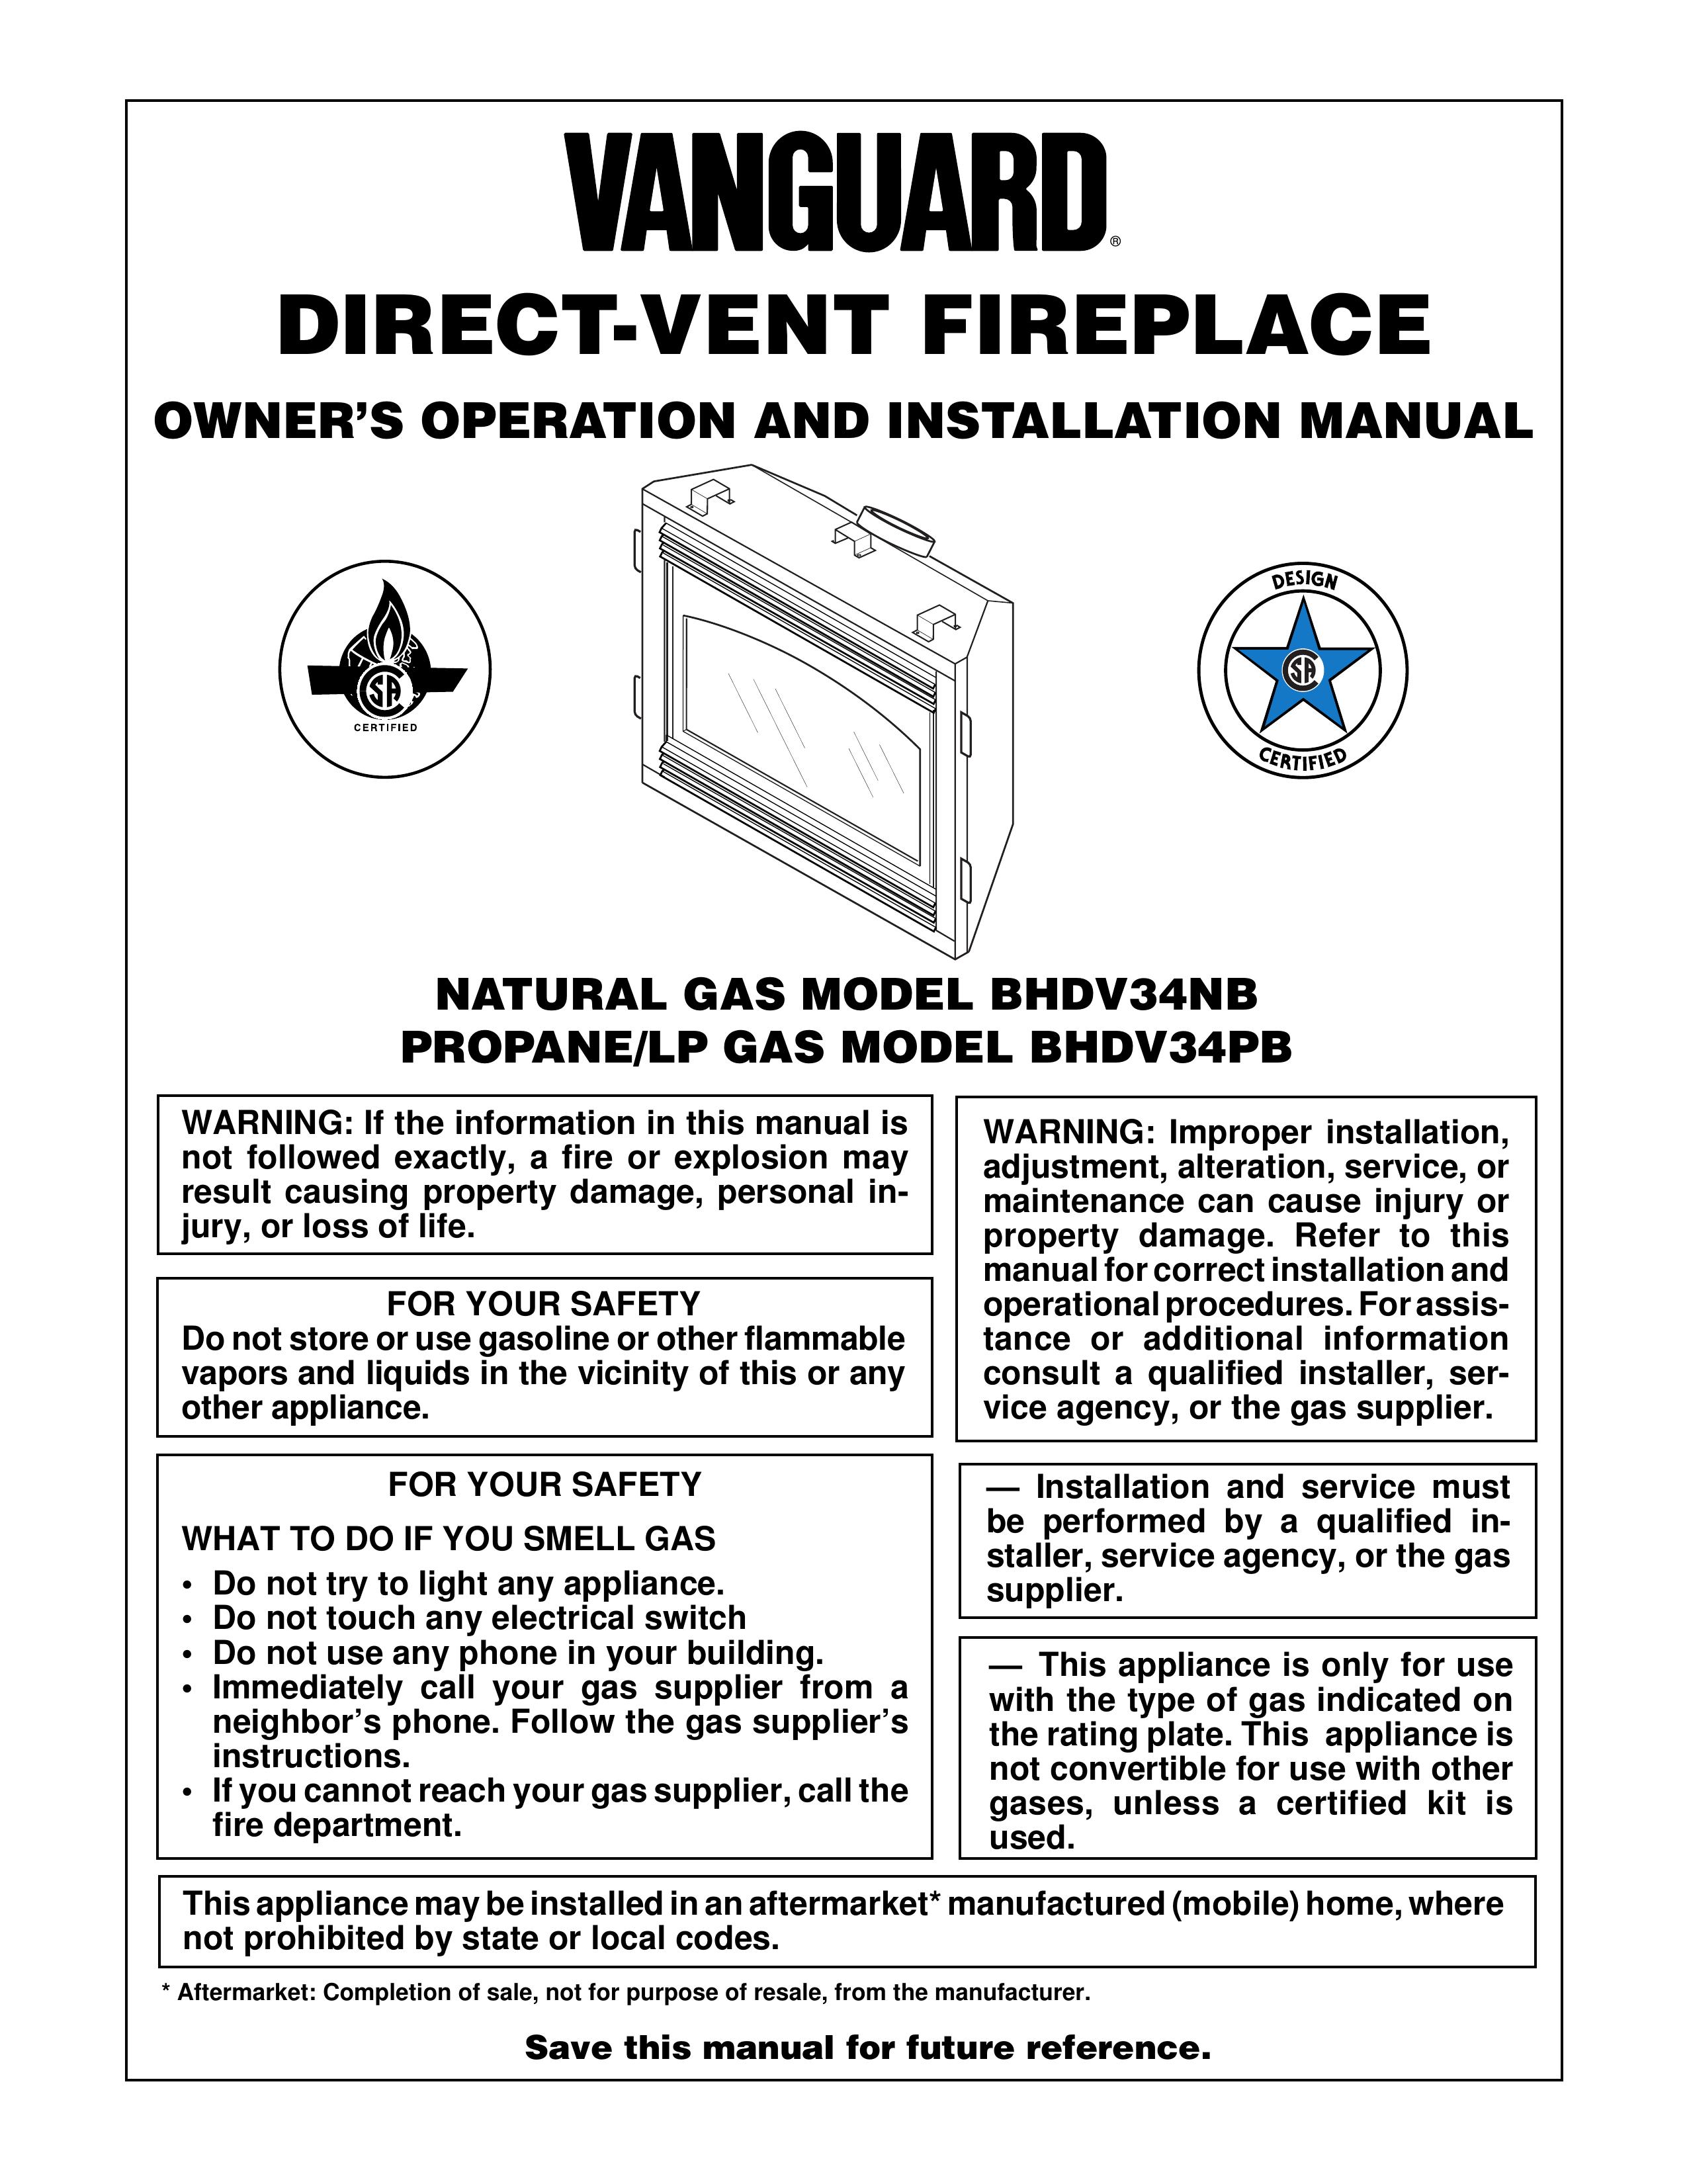 Vanguard Managed Solutions BHDV34PB Outdoor Fireplace User Manual